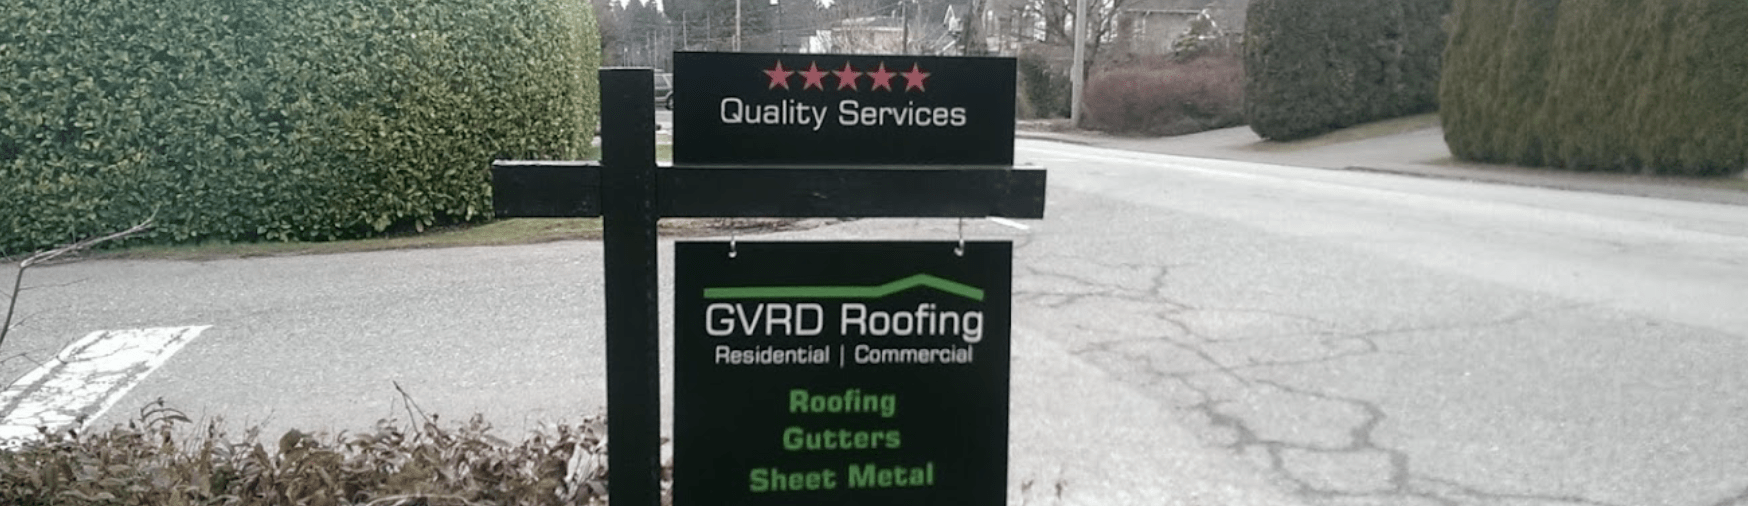 About GVRD Roofing